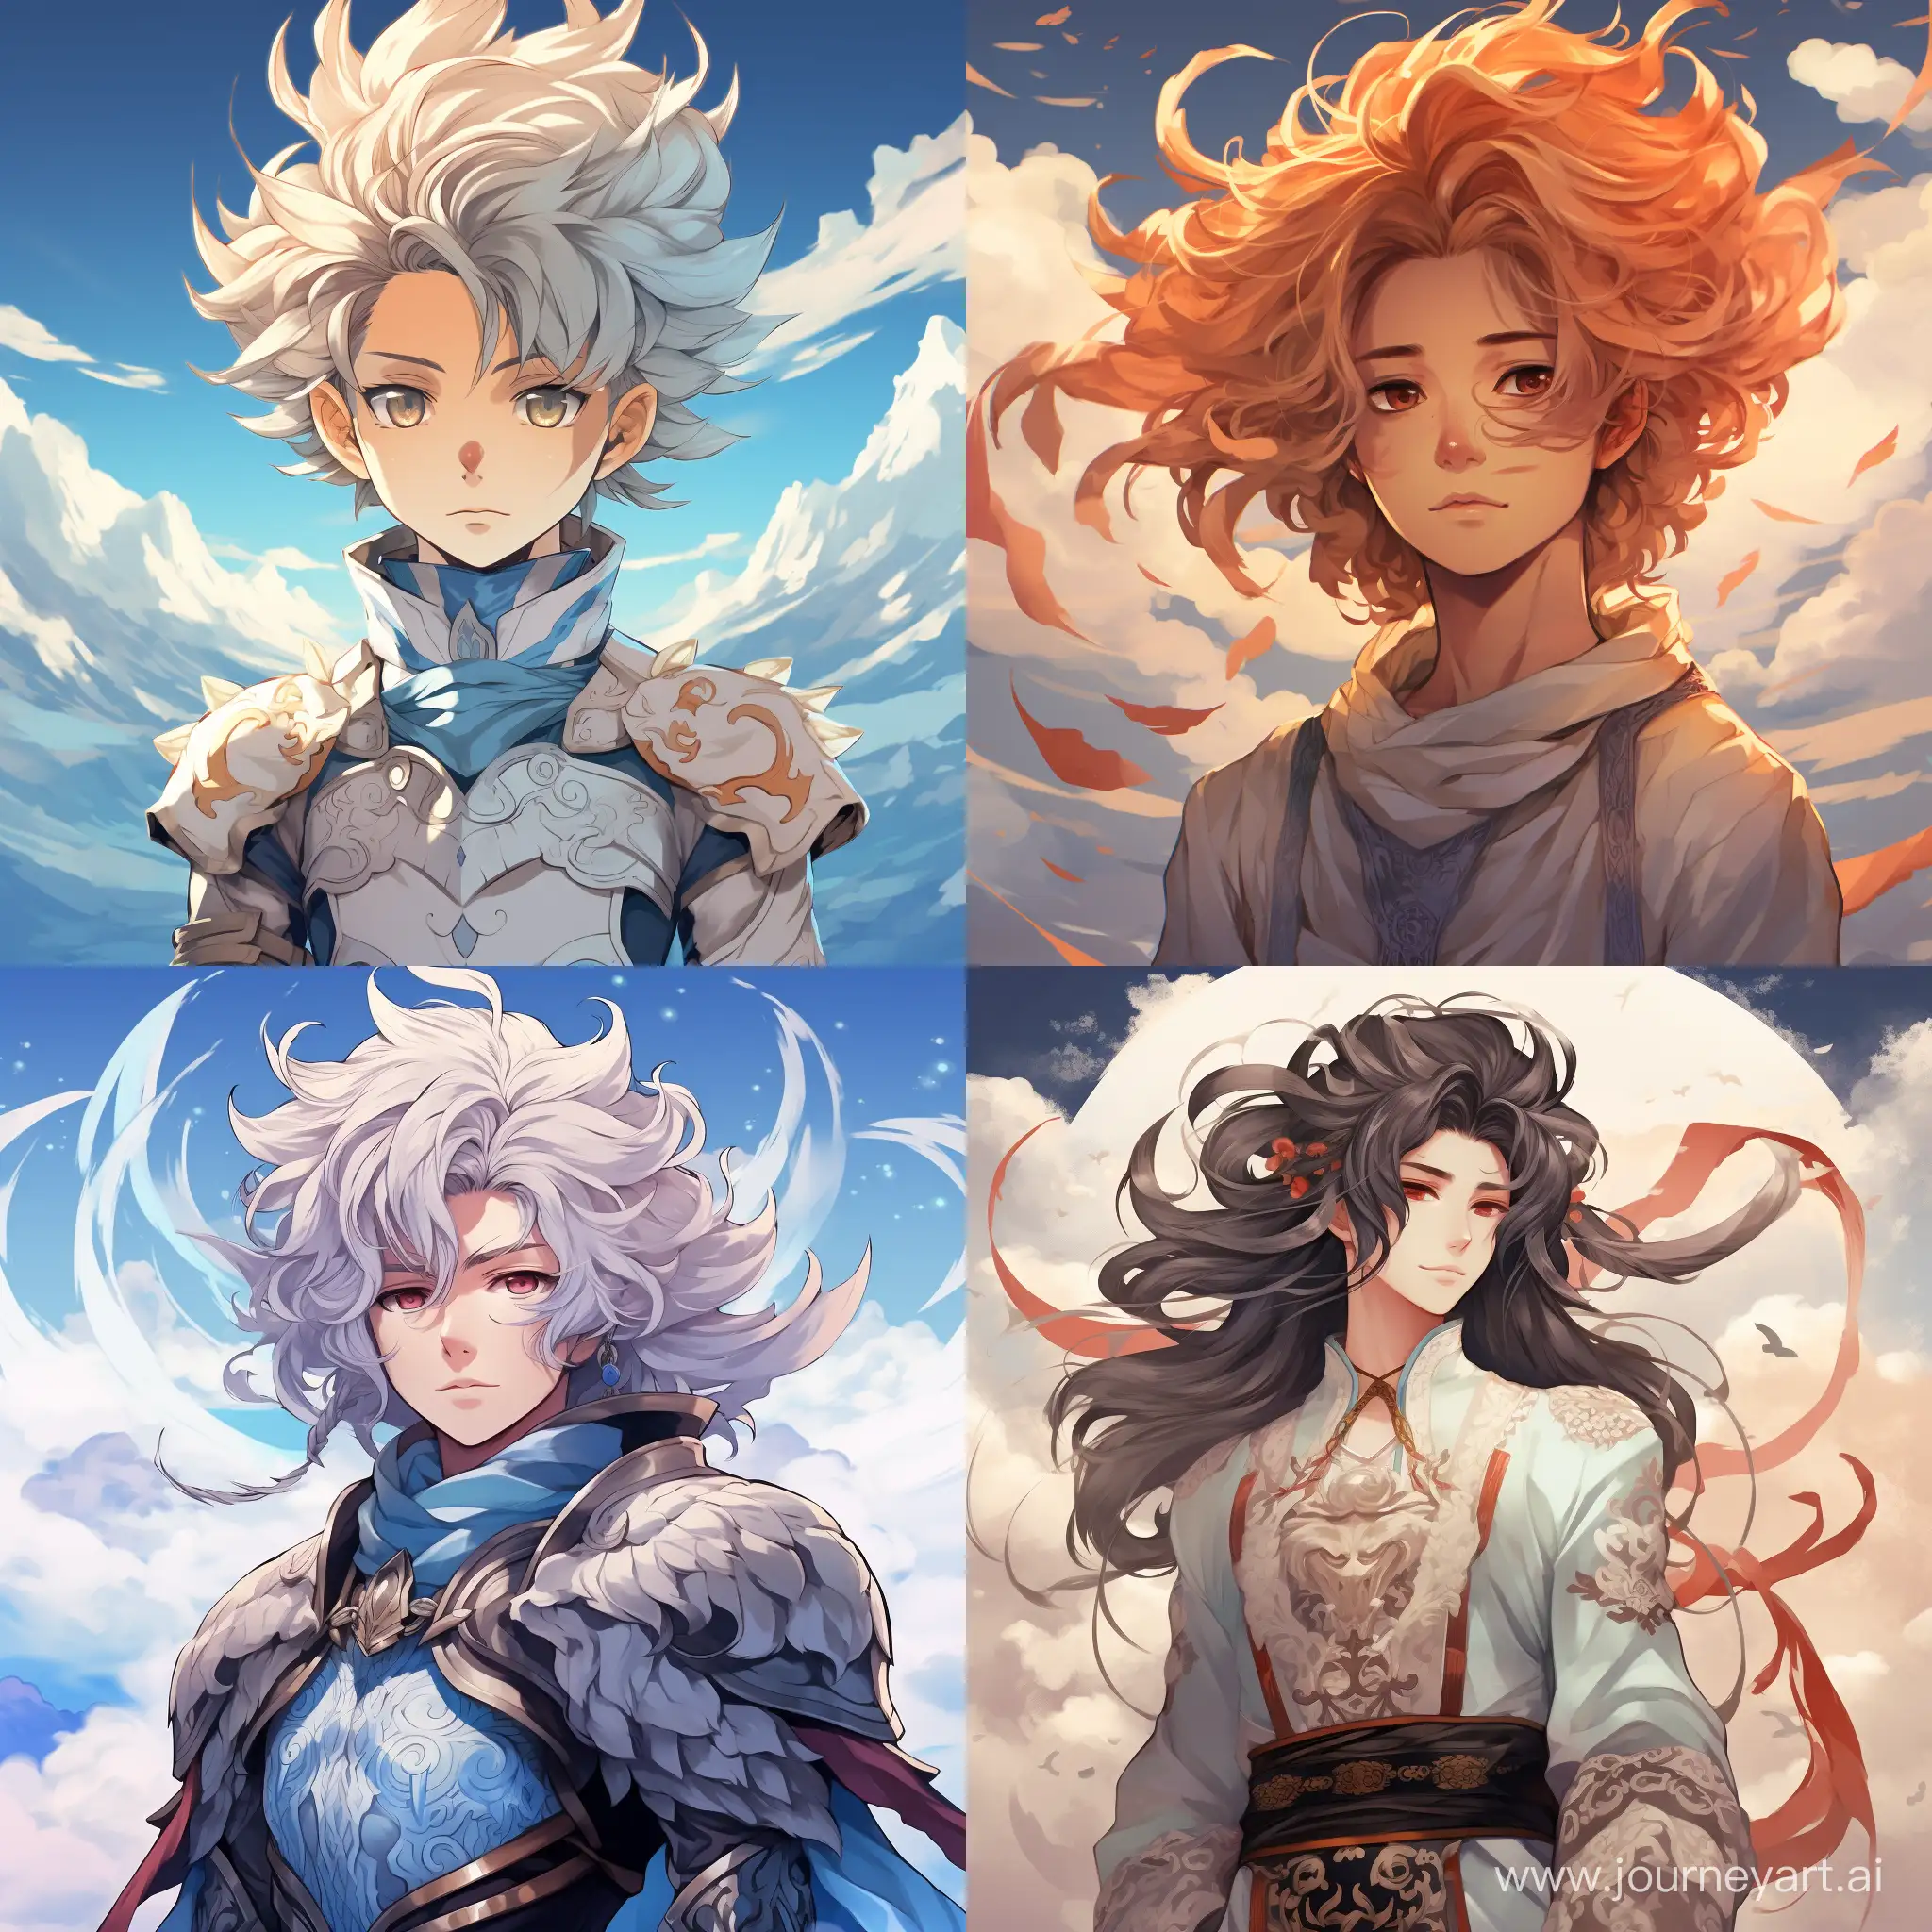 Prince of sky kingdom with hair made of clouds in anime style